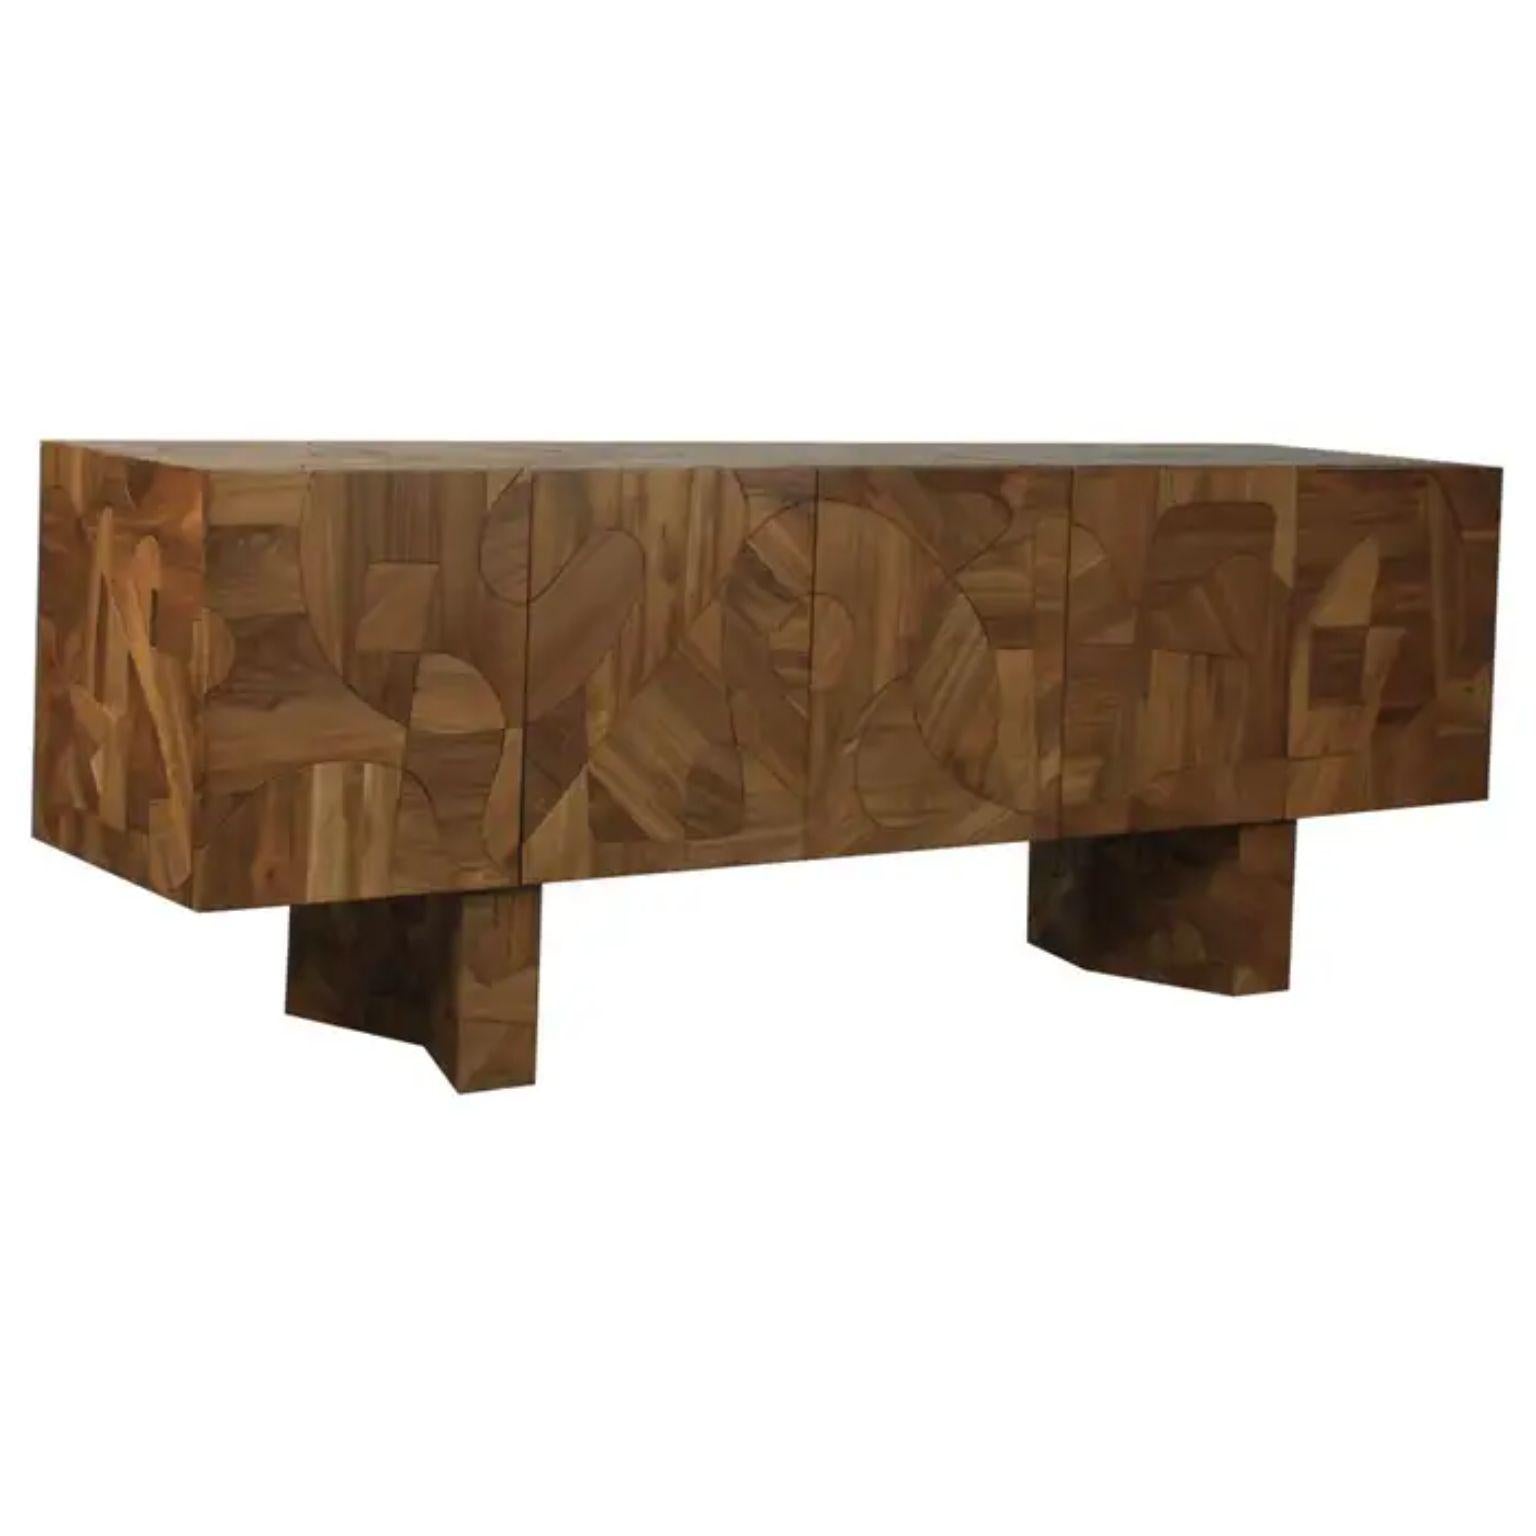 Omega Full Wooden Pach Acacia 5D Cabinet by Brutalist Be
One Of A Kind.
Dimensions: D 55 x W 240 x H 70 cm.
Materials: Acacia wood.

This exclusive sideboard is hand made of vintage acacia wood, been carefully selected and then shaped by Felix de